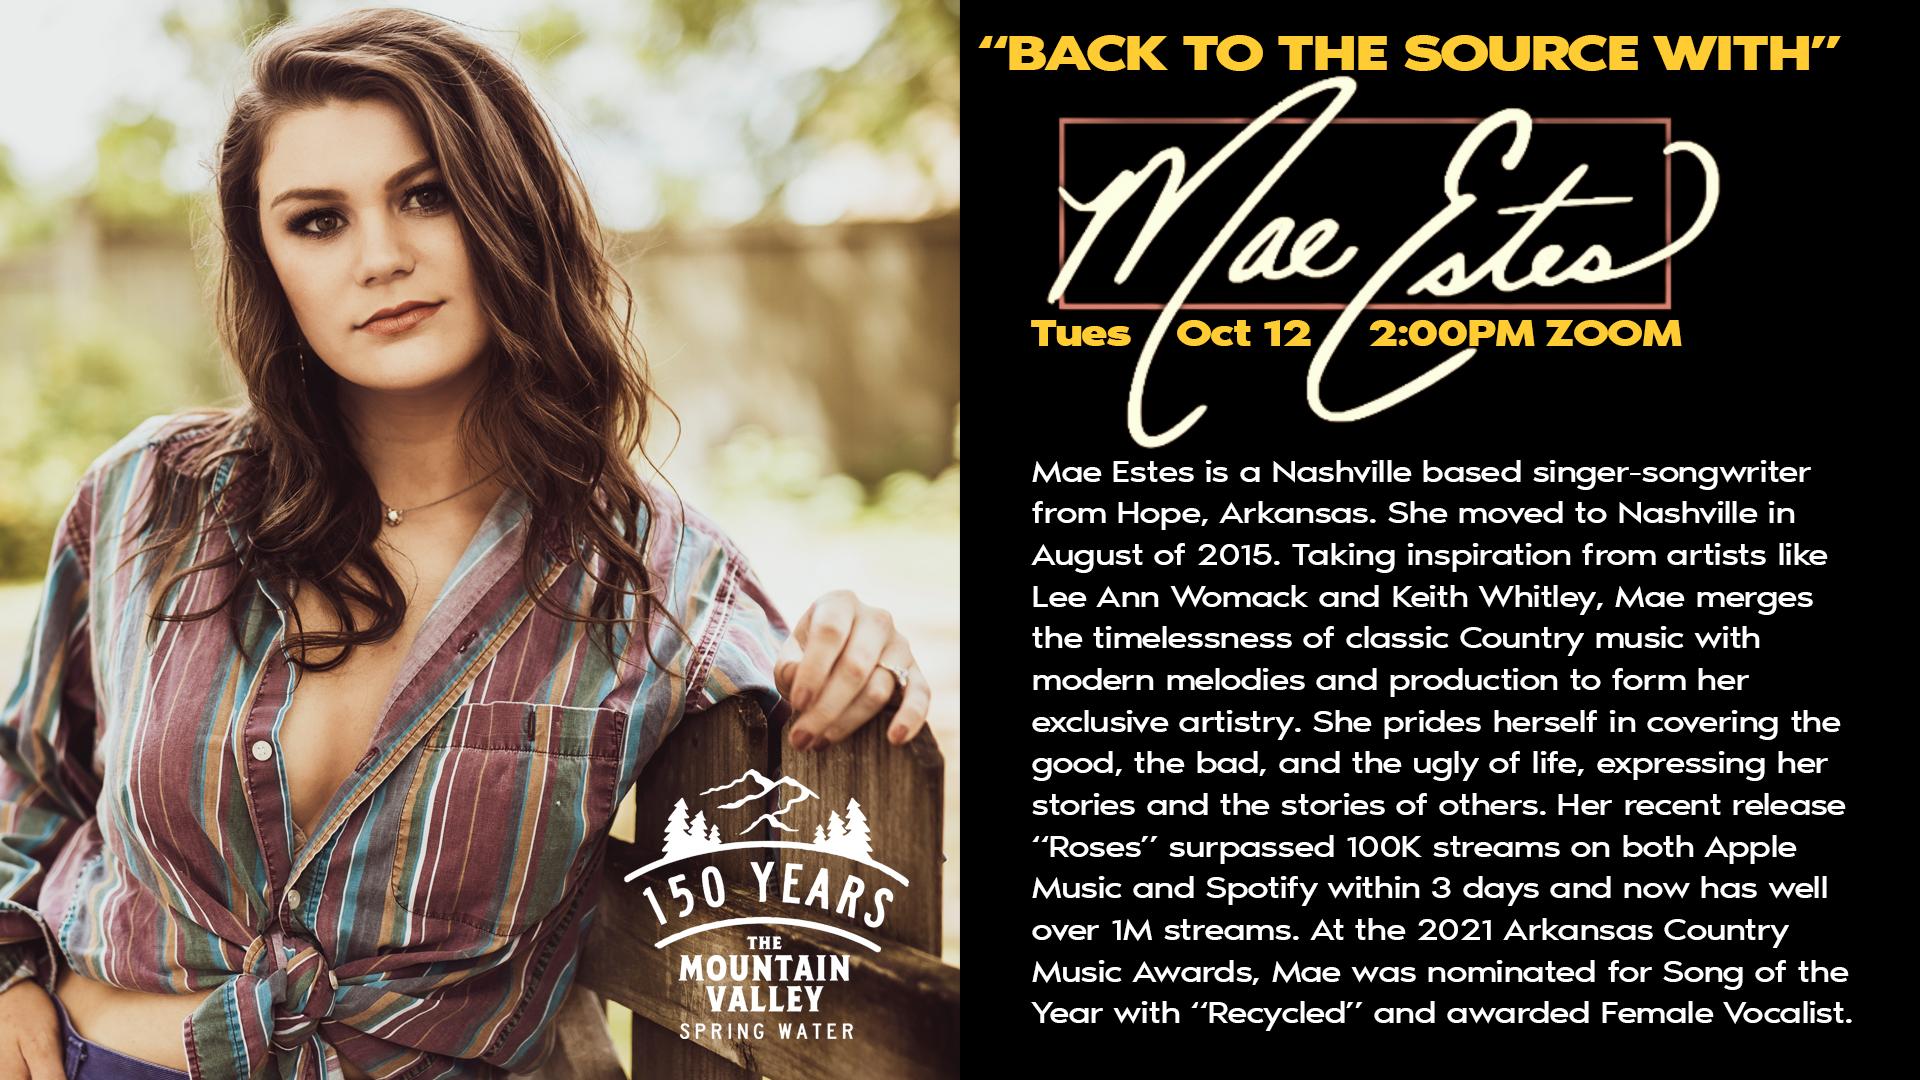 "Back to the Source" A conversation with country music singer Mae Estes